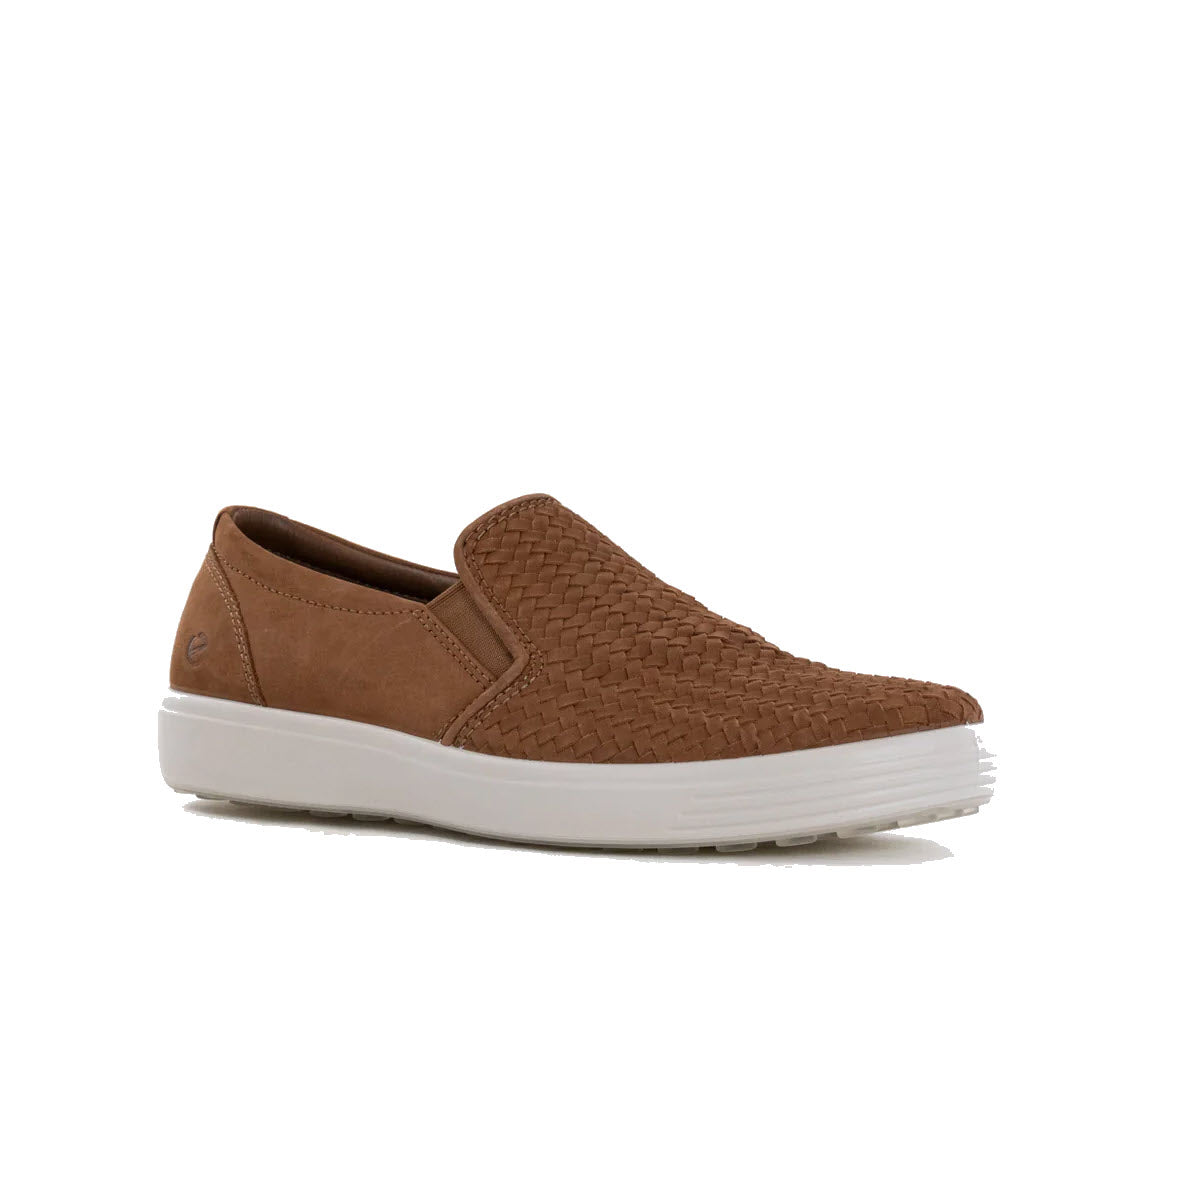 Brown Ecco Soft 7 slip-on casual shoe with a white sole, displayed against a white background.